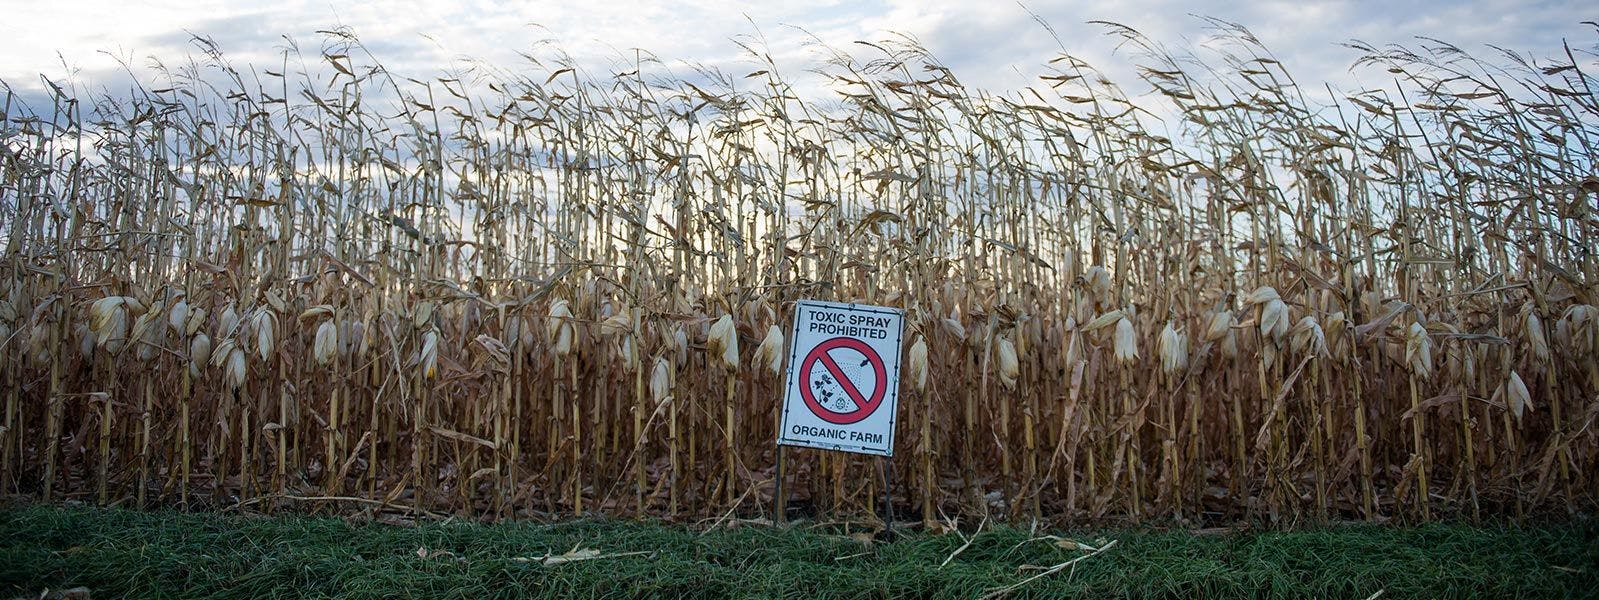 A toxic spray prohibited sign in front of an Organic Valley corn field